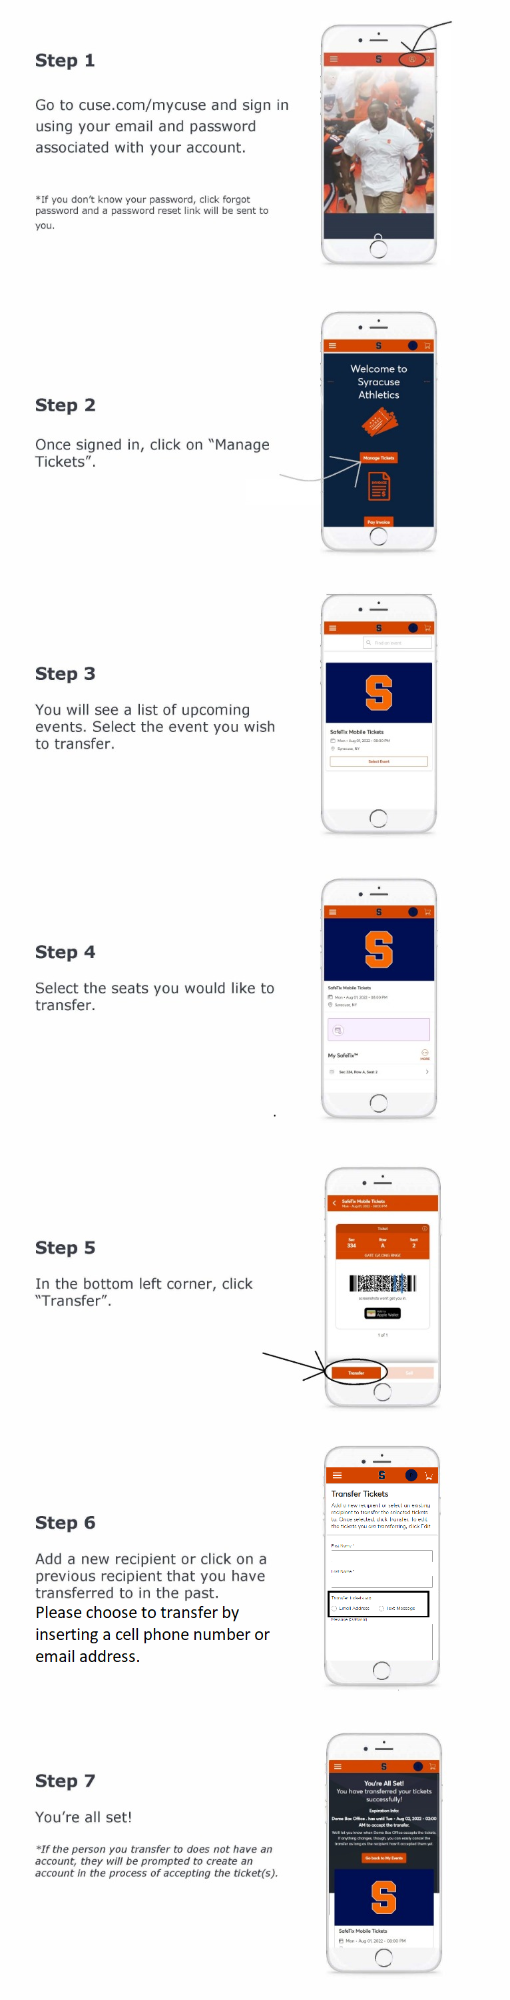 Step by Step Guide on how to transfer your mobile tickets.